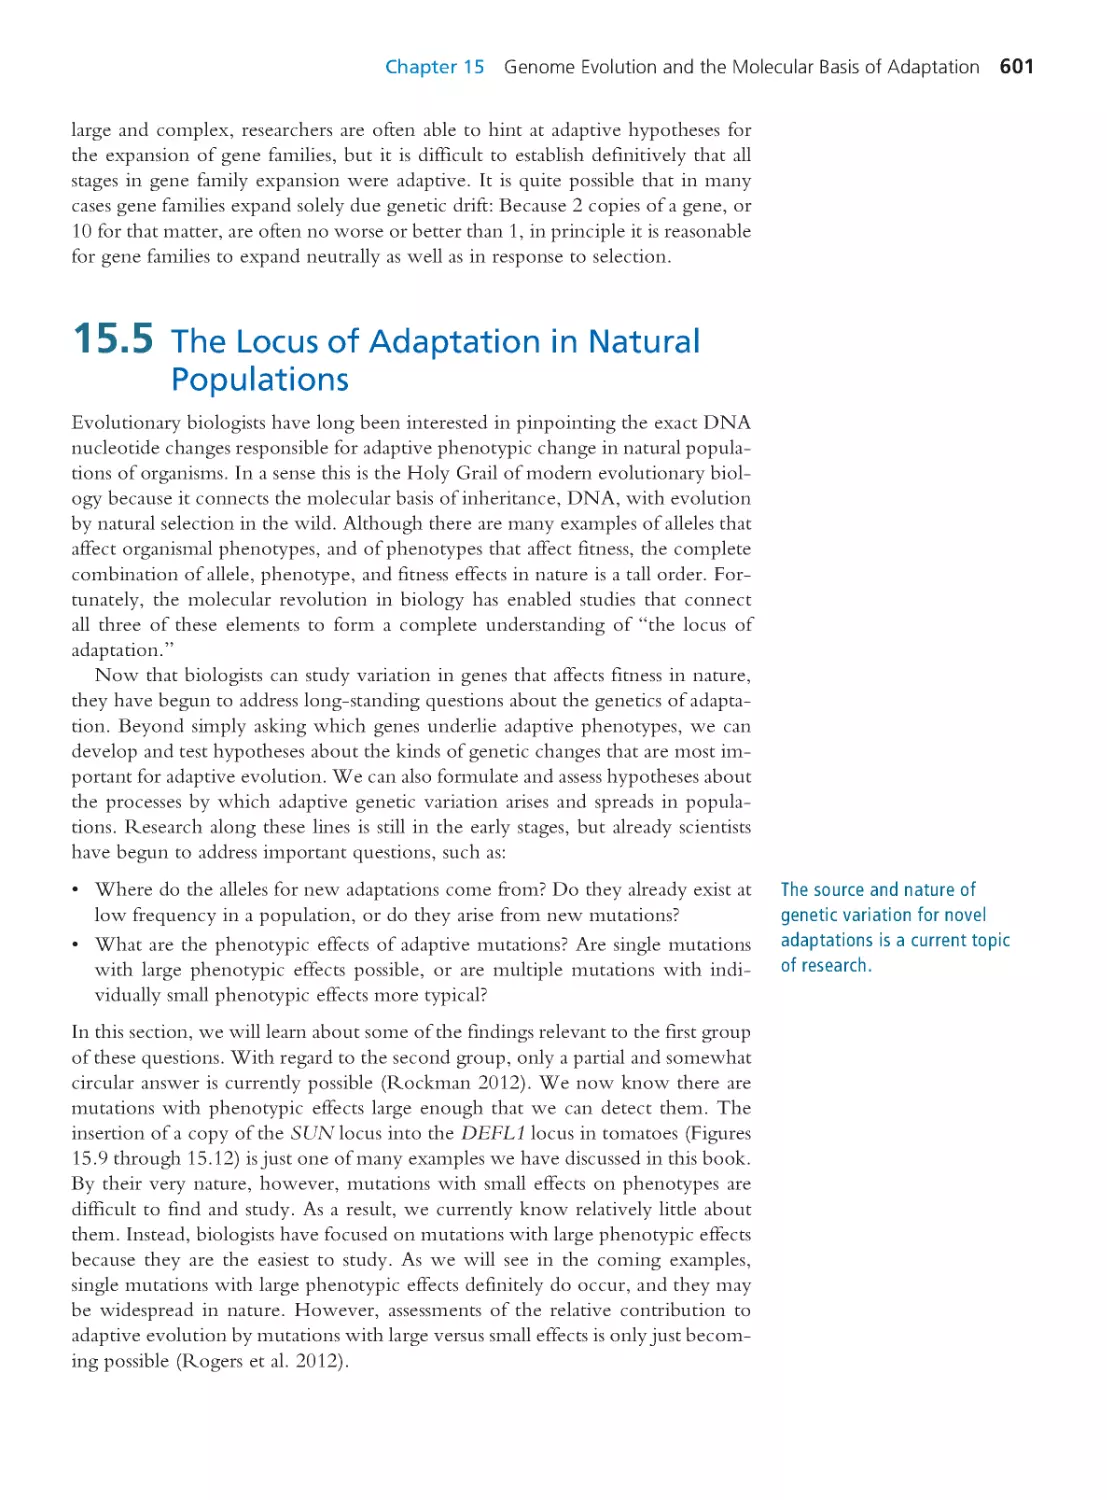 15.5 The Locus of Adaptation in Natural Populations